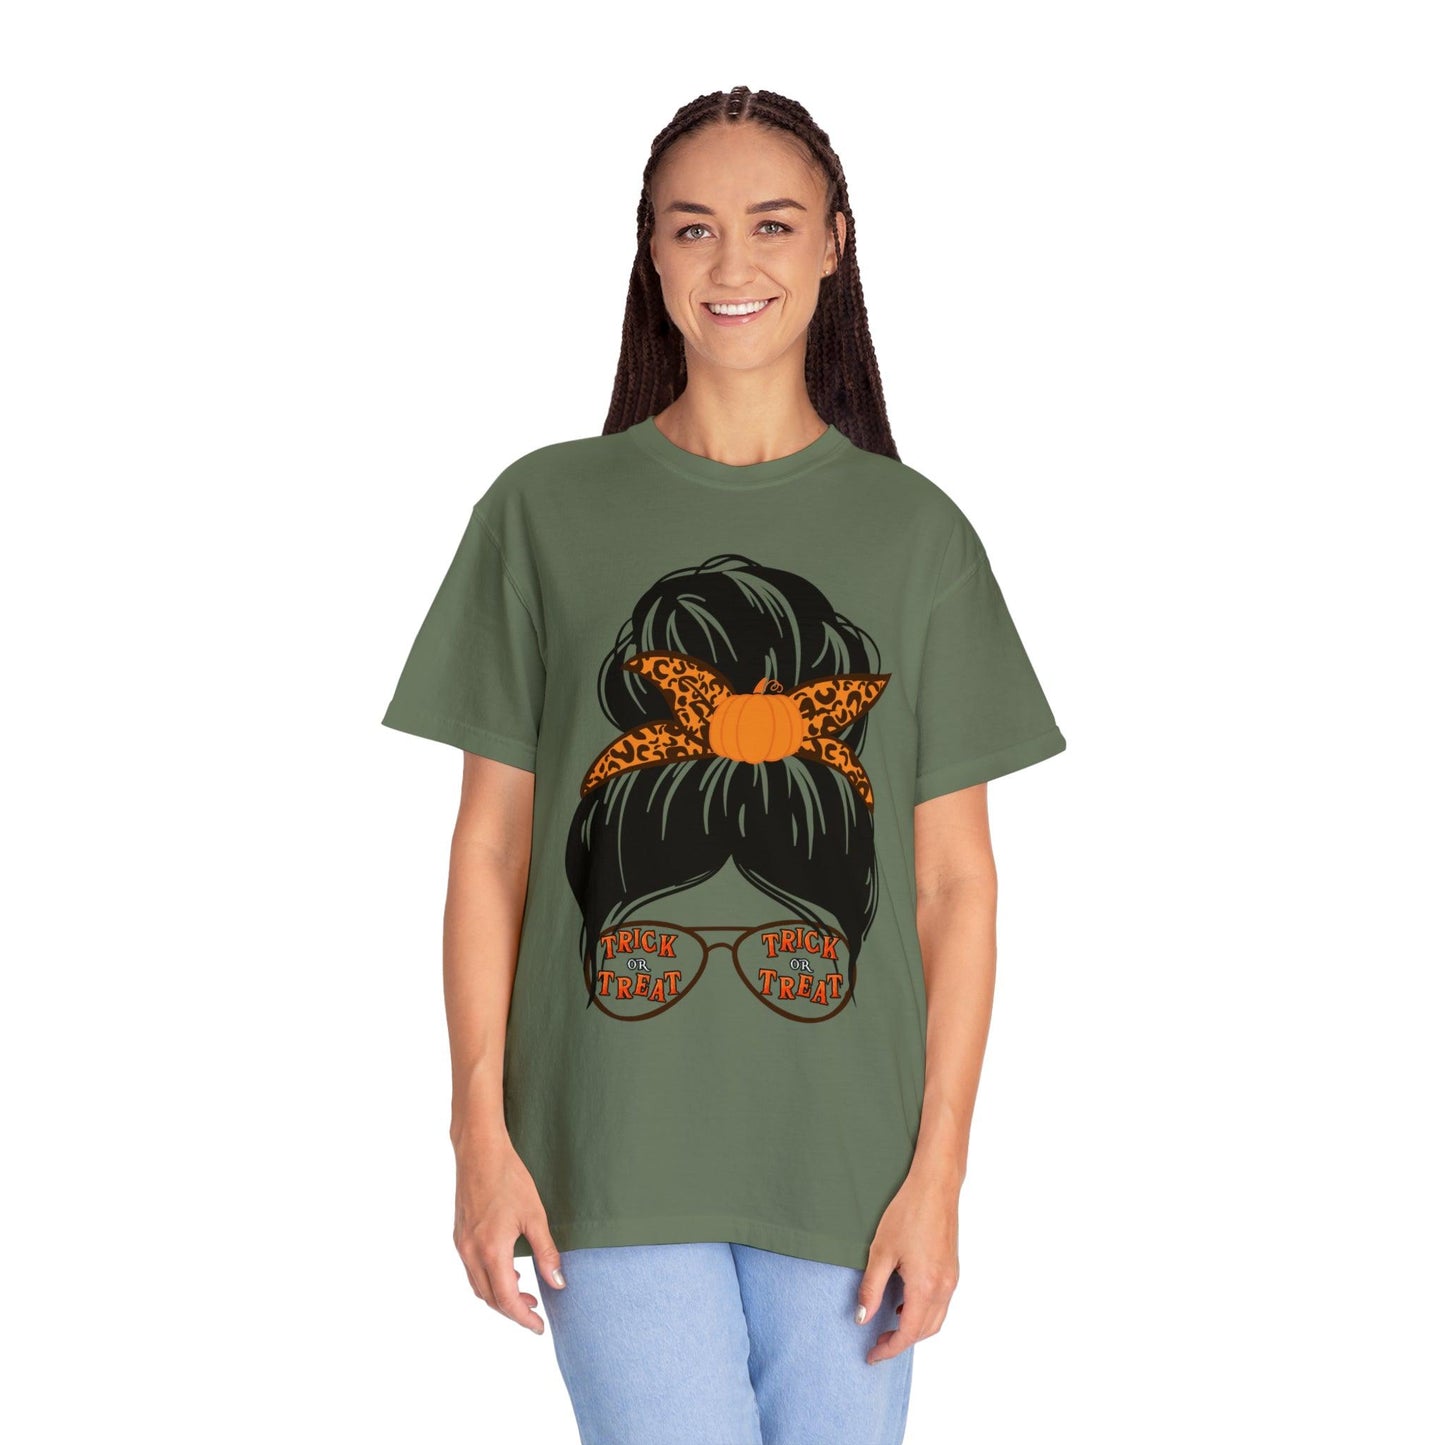 Mom Halloween Party Outfit Trick or Treat Shirt Vintage Shirt Halloween Costume Cute Spooky Shirt, Halloween Gift Halloween T-shirt Trick or Treat Outfit